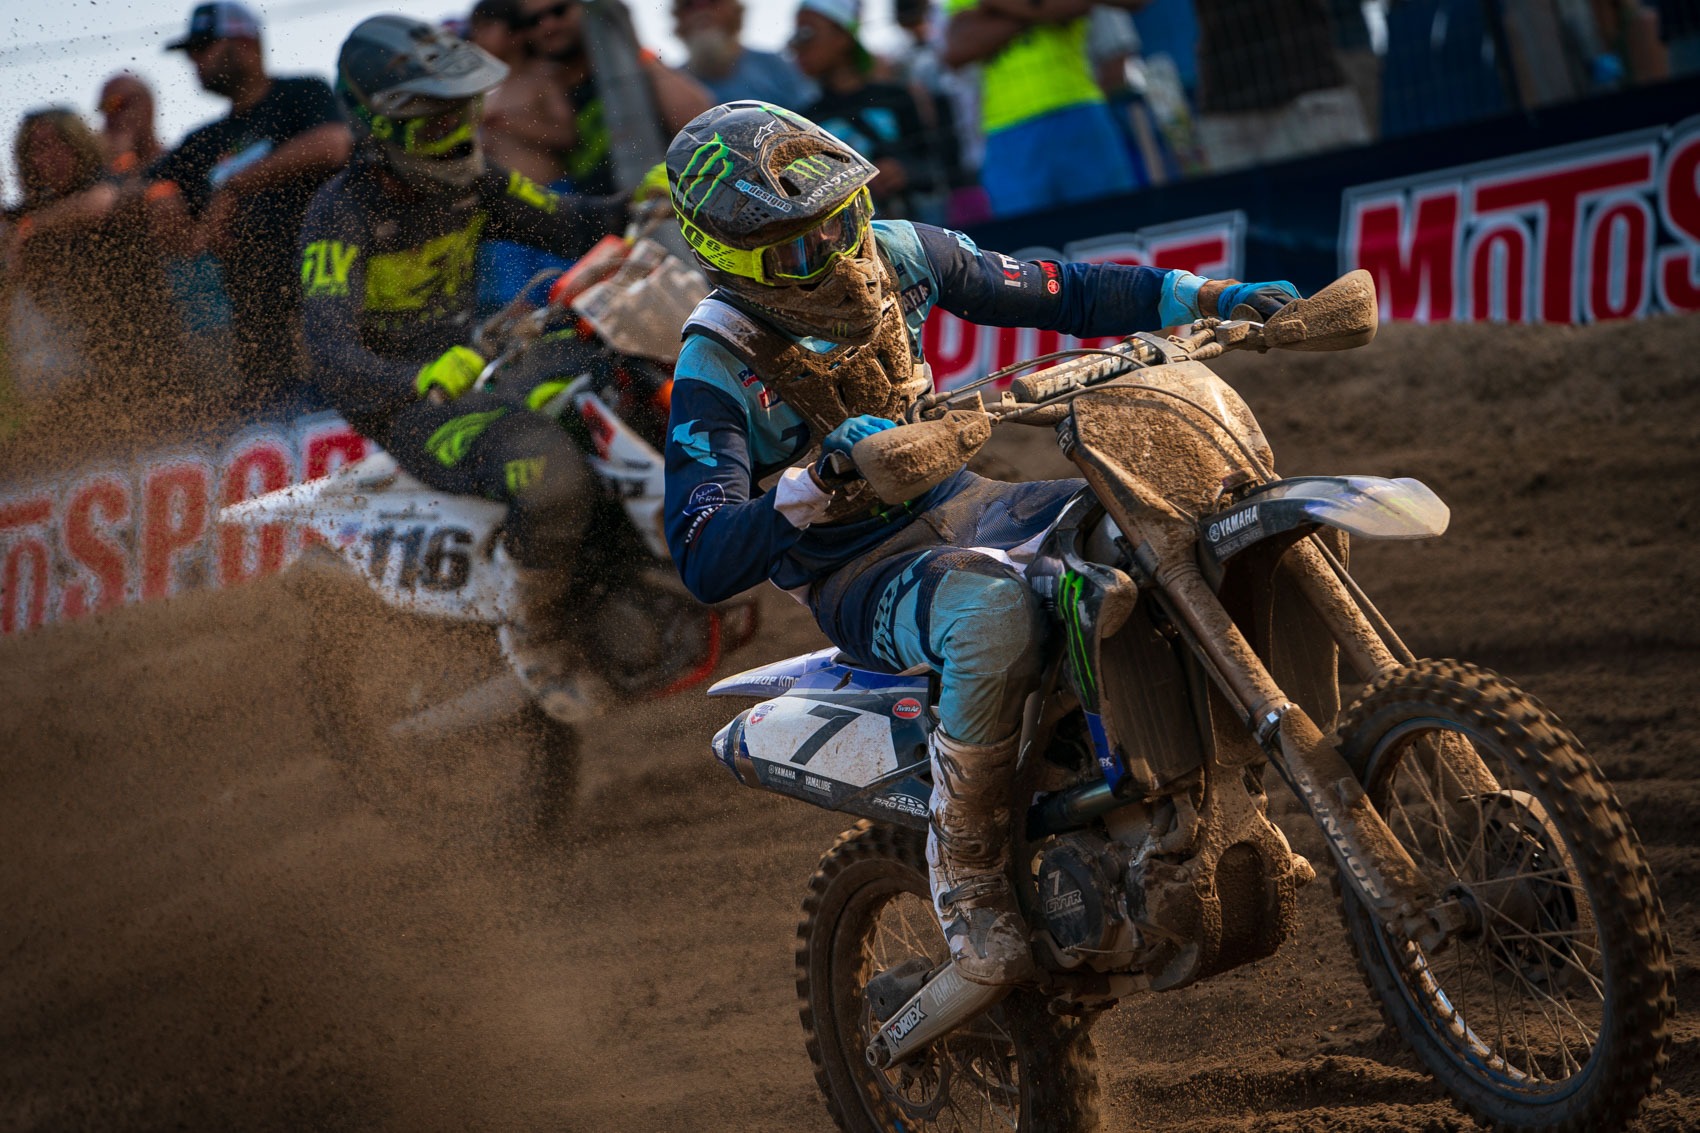 Pro Motocross Alters Anti-Doping and 450 Class Eligibility Rules Swapmoto Live pic